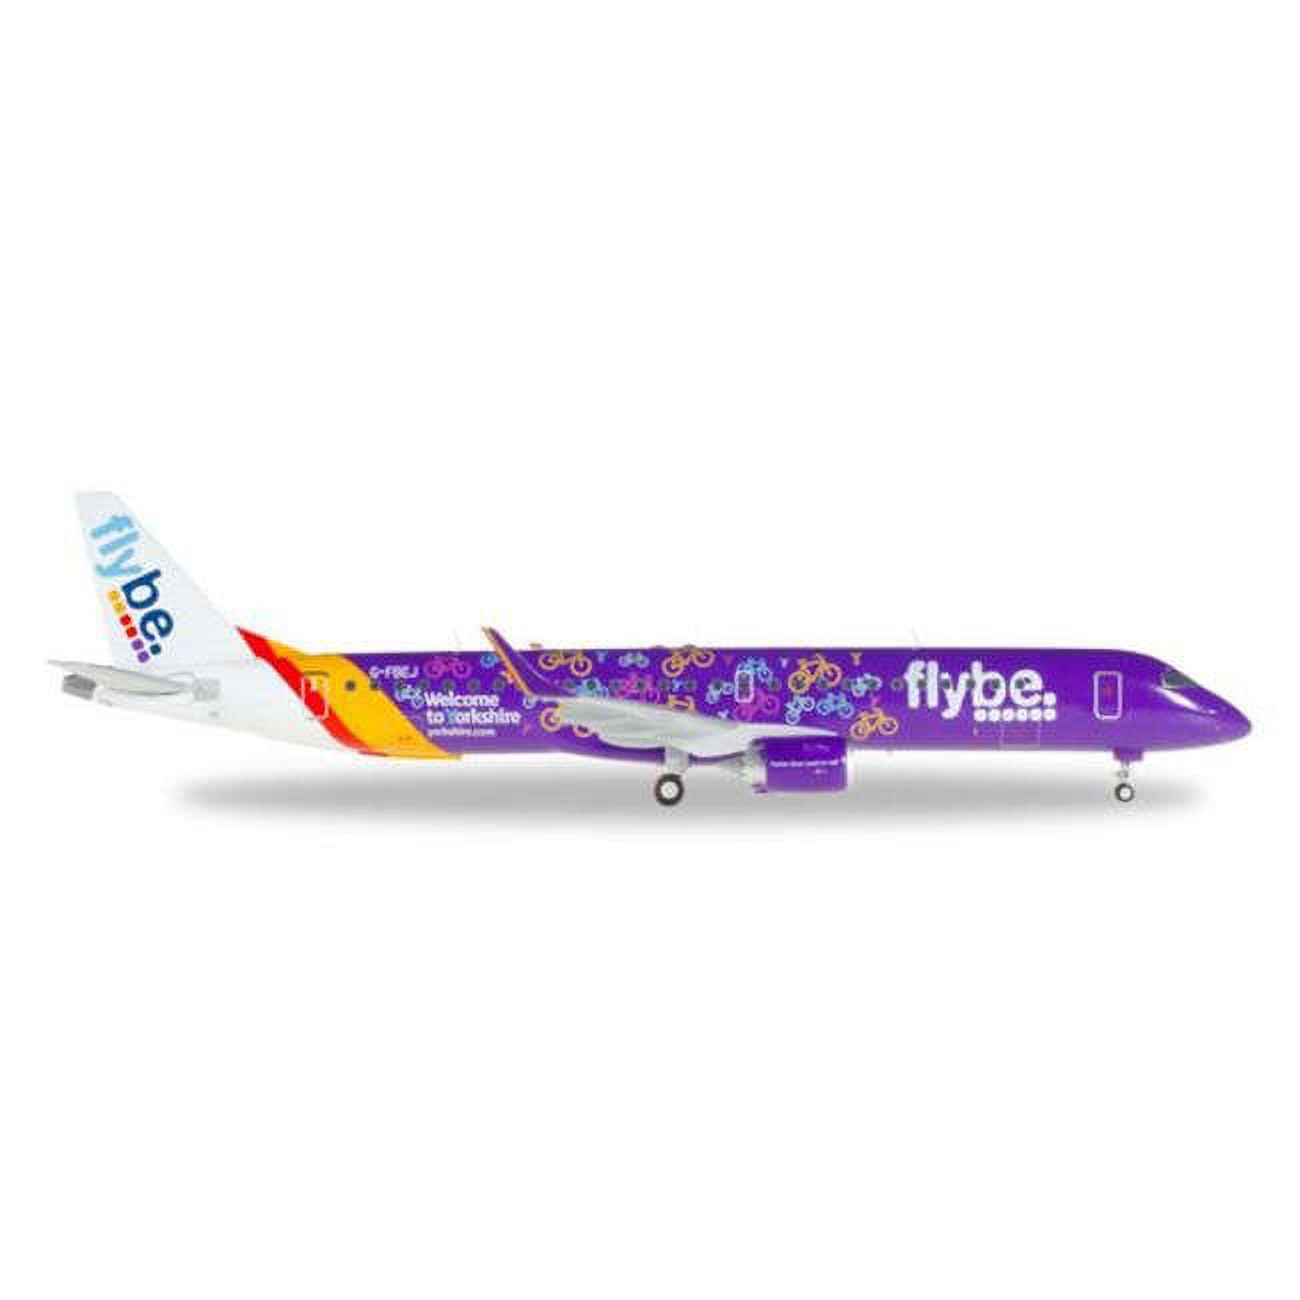 Herpa 200 Scale Commercial-private E558297 Flybe Erj195 Welcome To Yorkshire No.g-fbej, 1-200